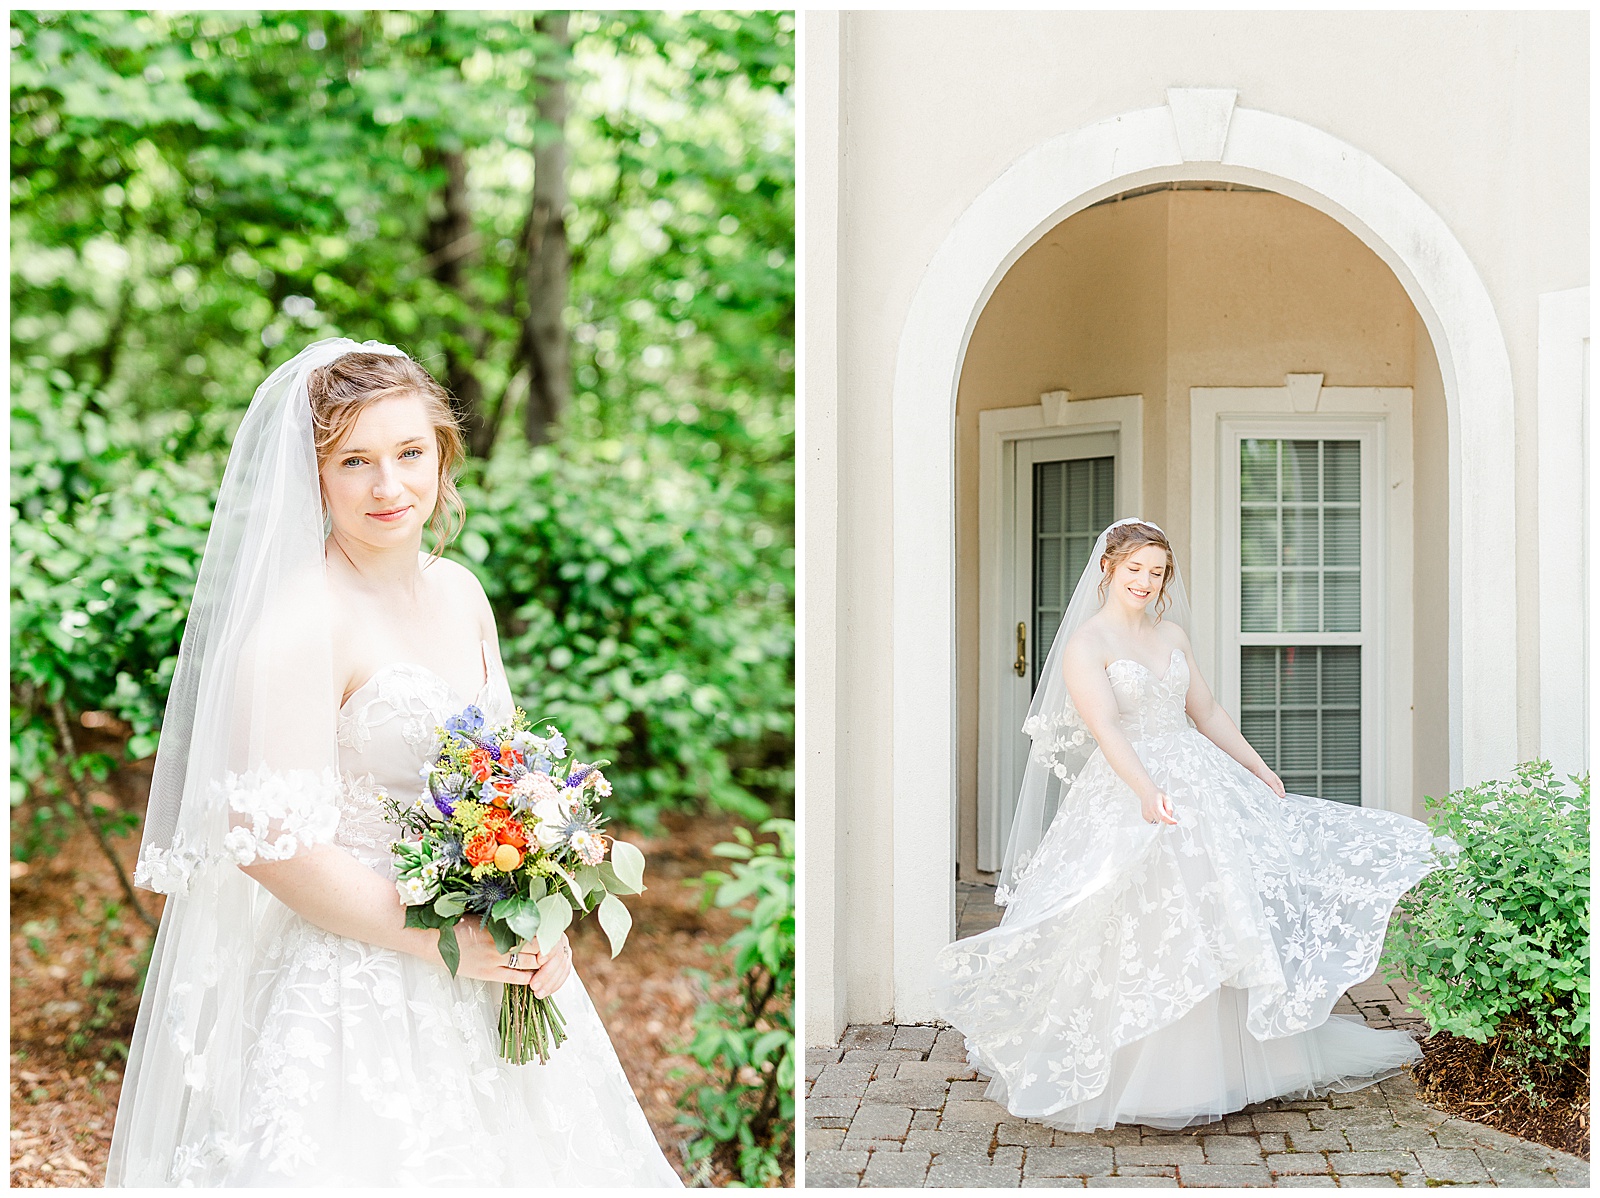 lakehouse mansion location 👰 Bride: lace wedding dress + veil 💐 Colorful orange and blue bouquet 📸 Outdoorsy Lake and Mountain Bridal Session with Julia | Kevyn Dixon Photography